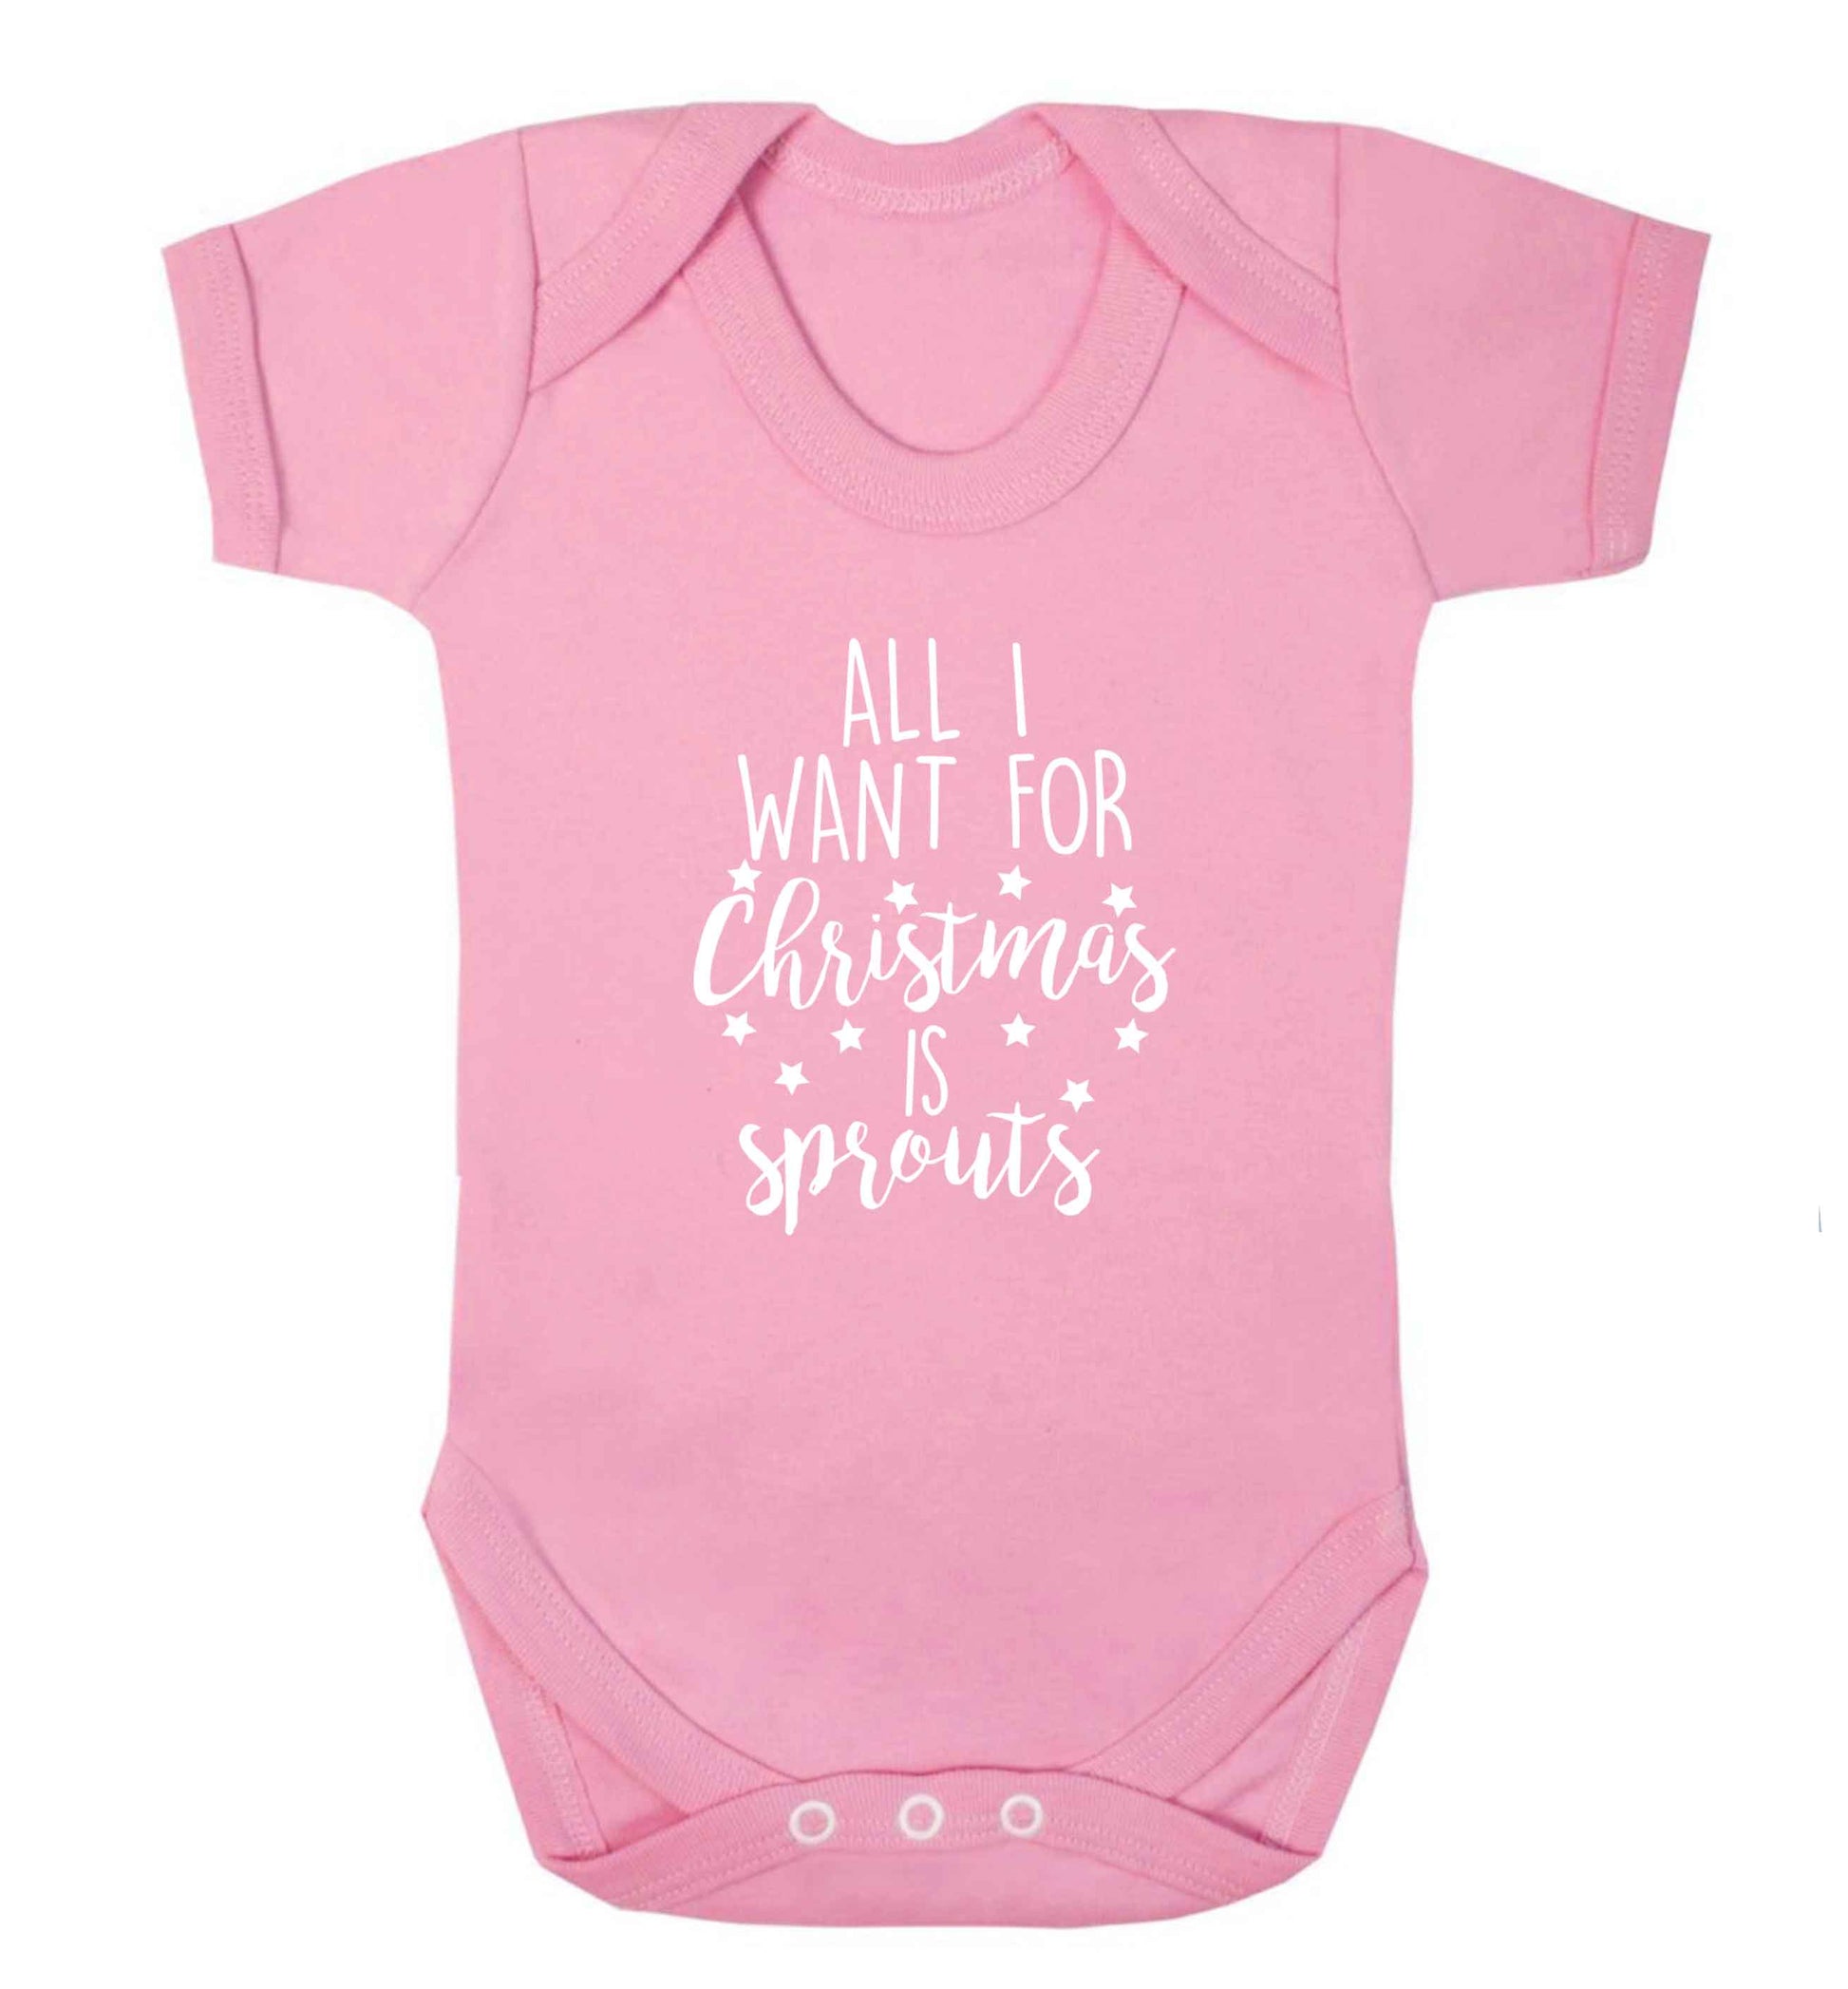 All I want for Christmas is sprouts baby vest pale pink 18-24 months